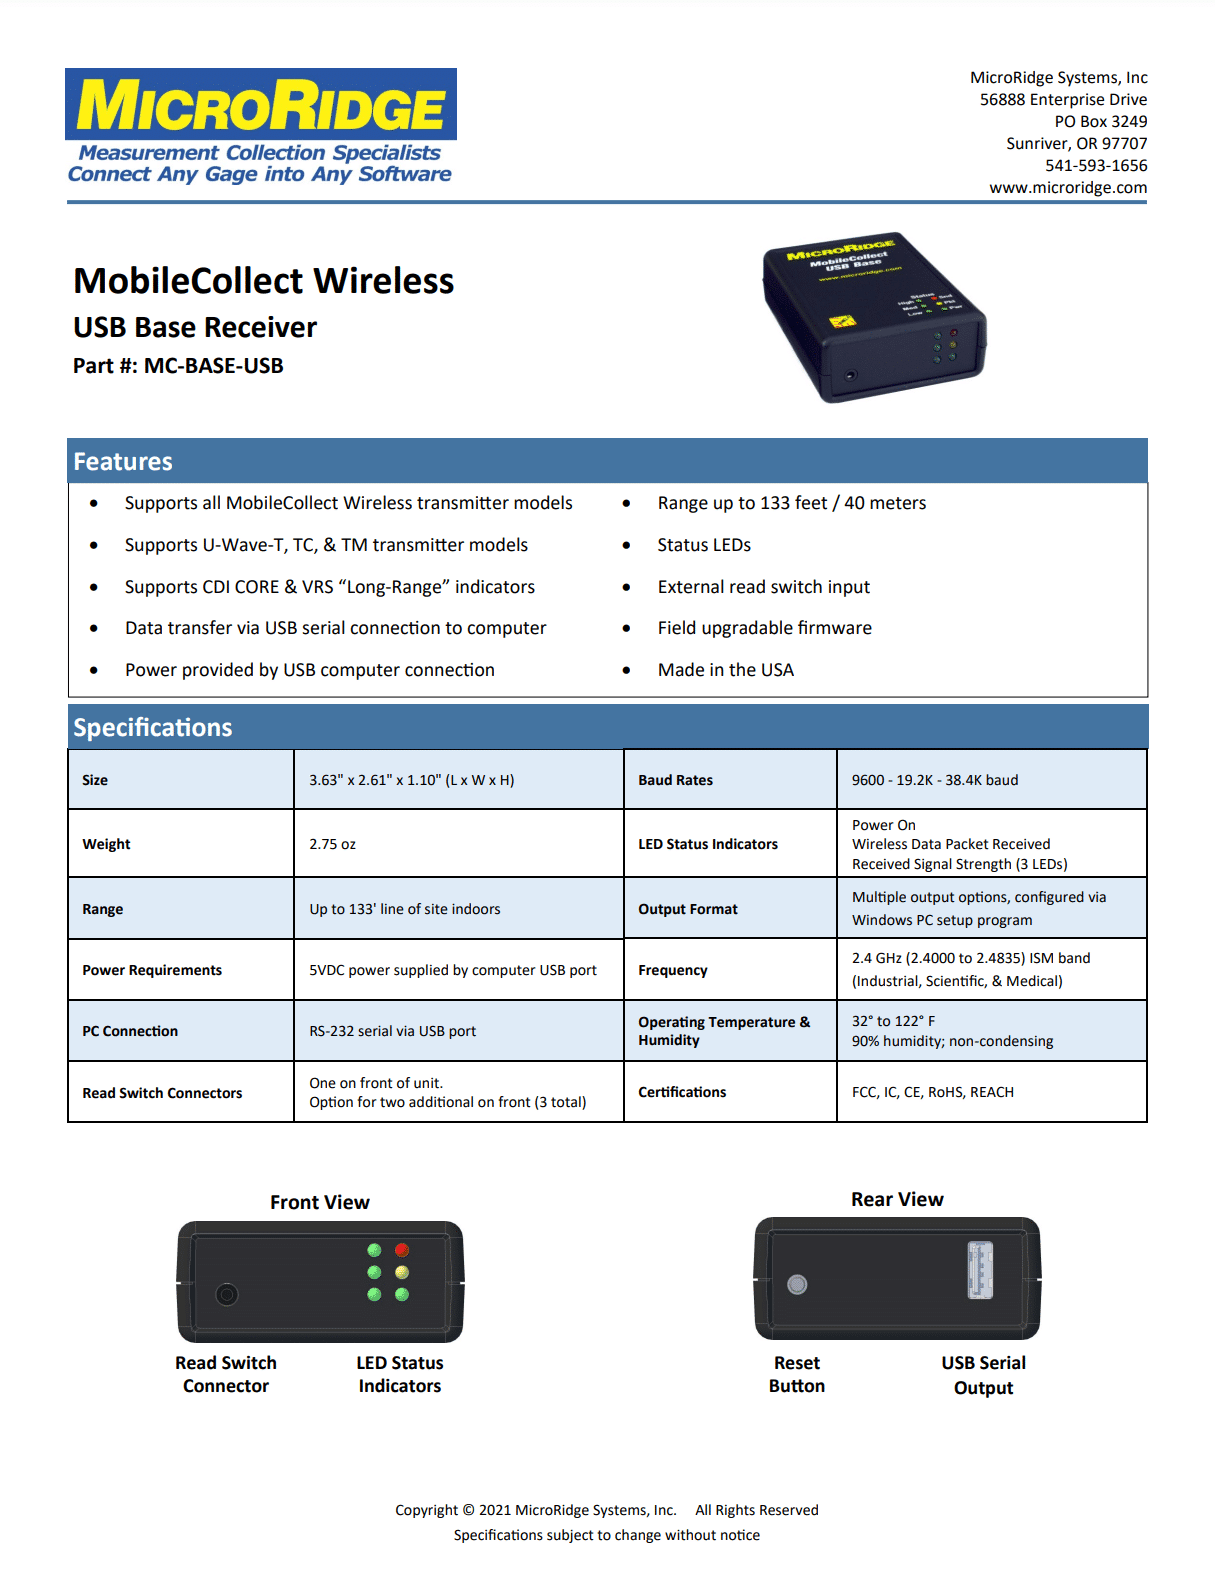 MobileCollect Spec Sheets